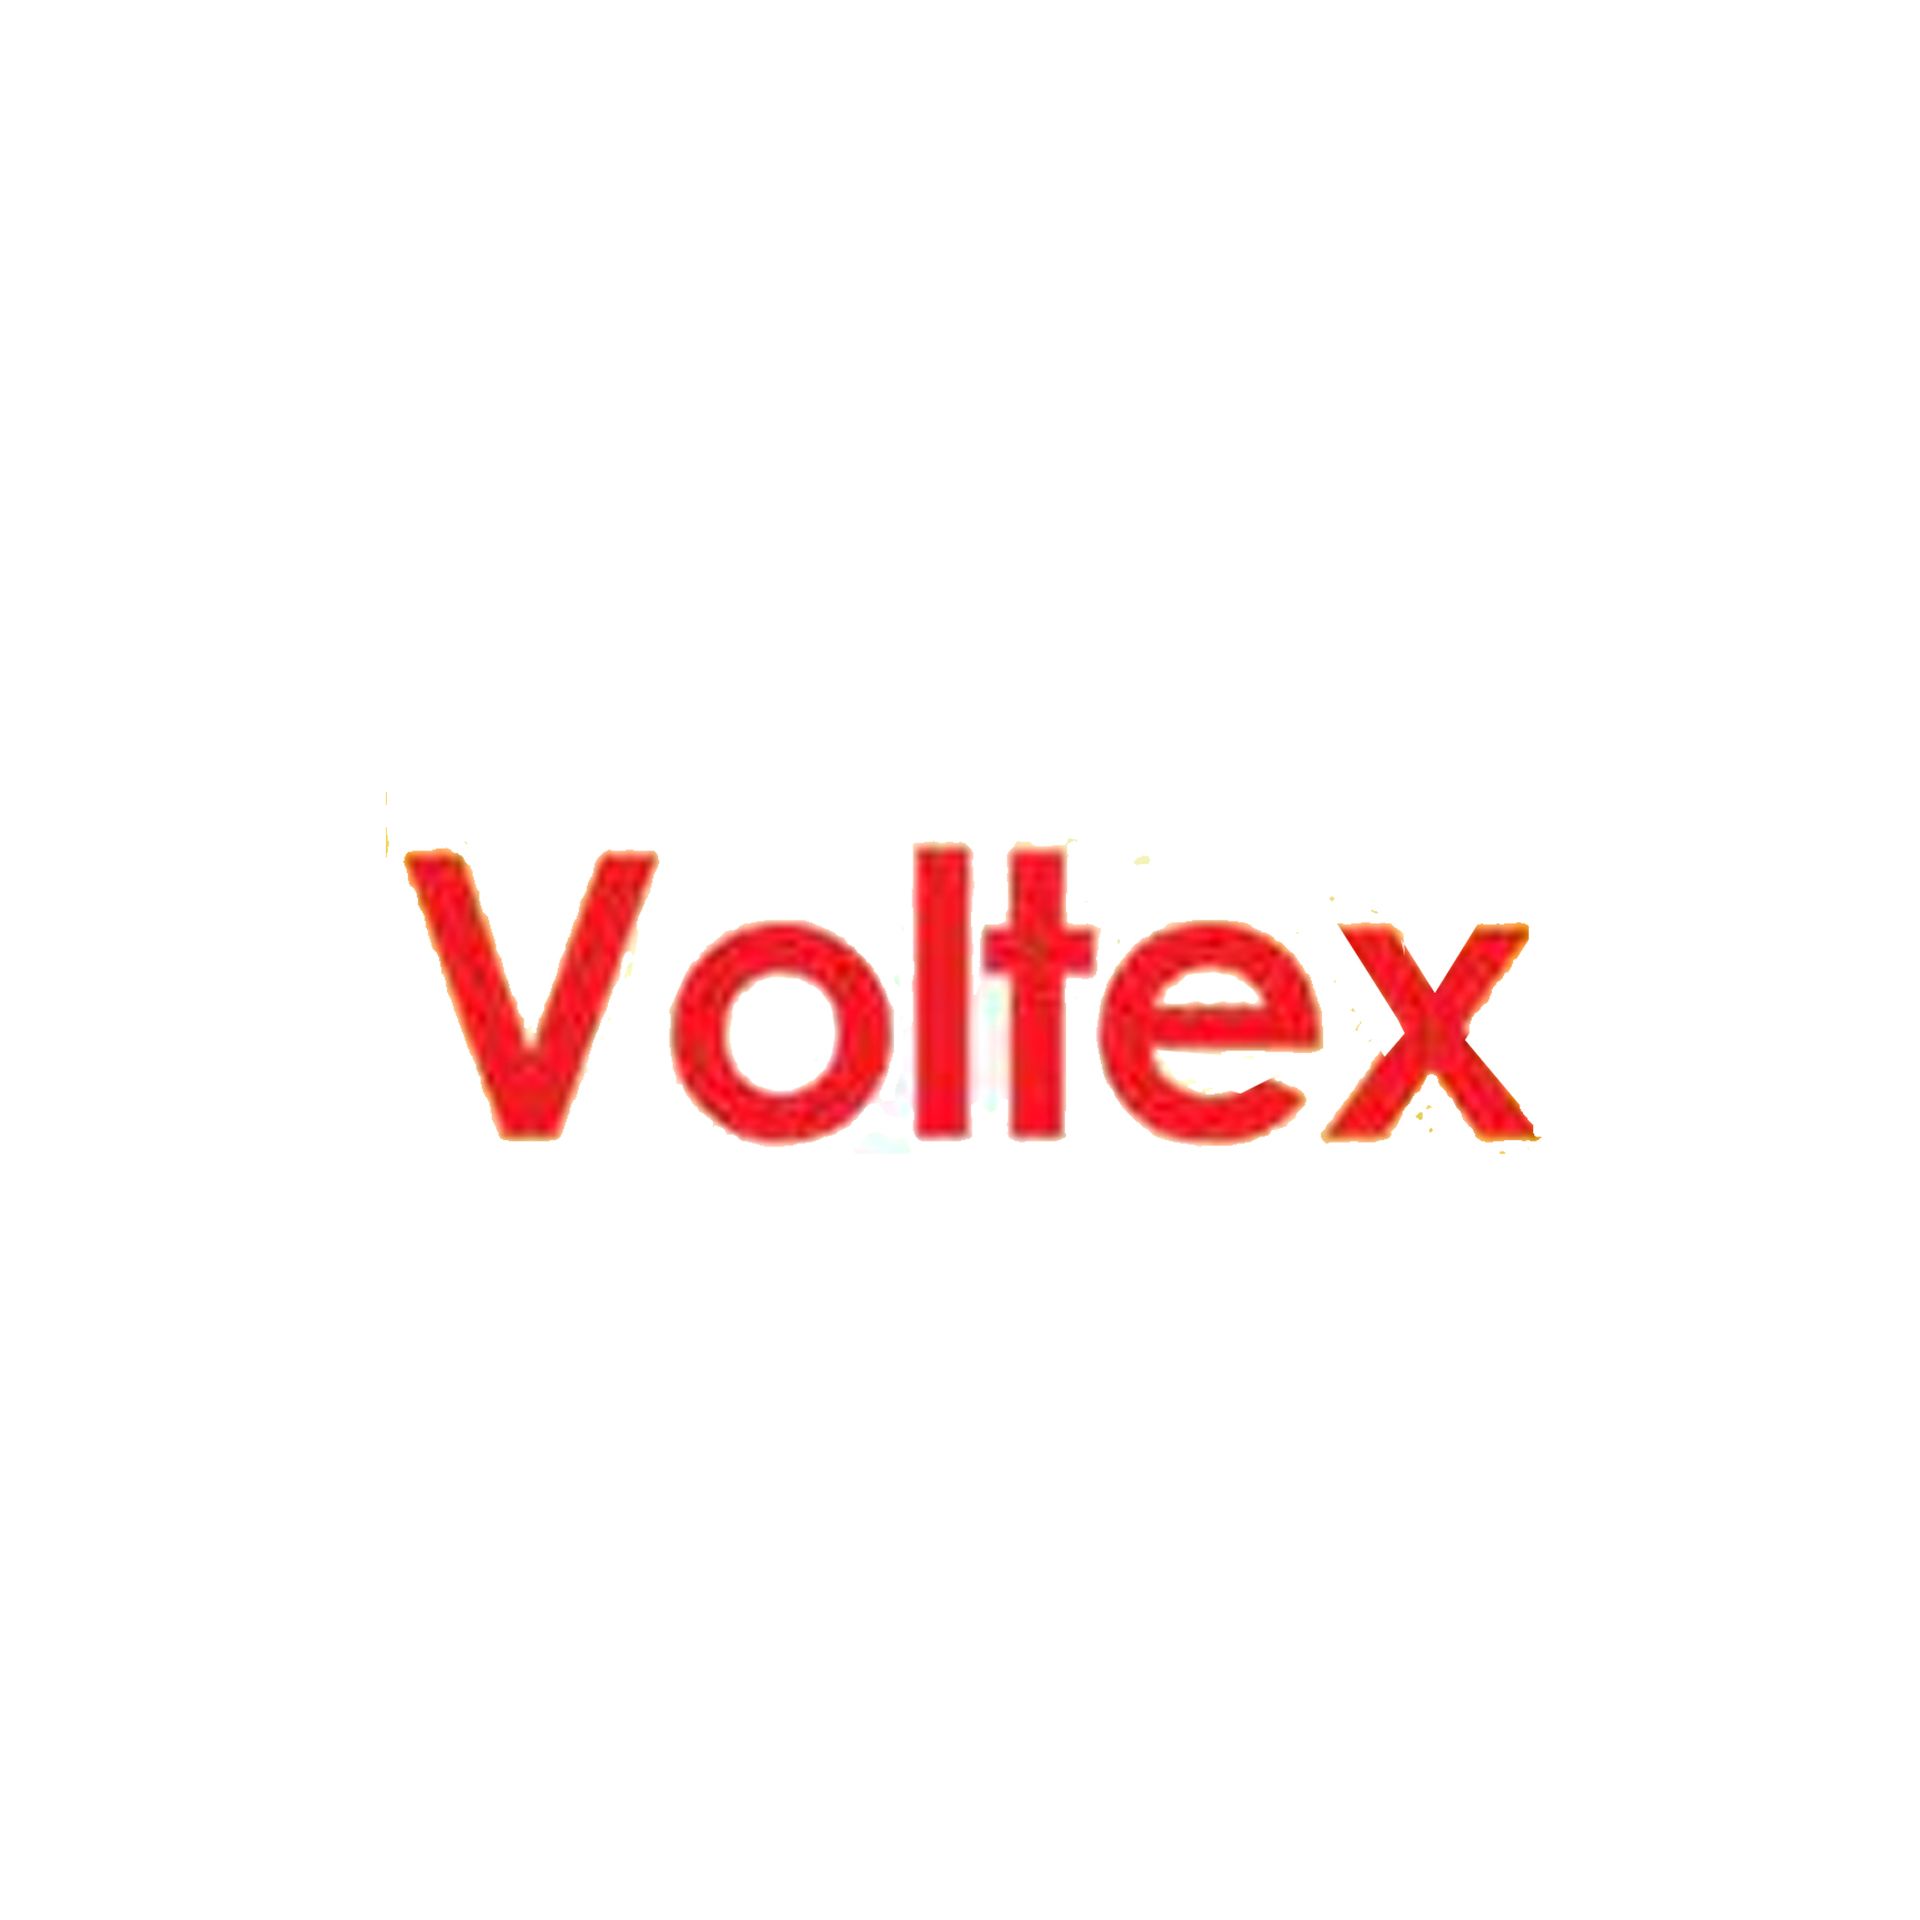 Product Brand: Voltex